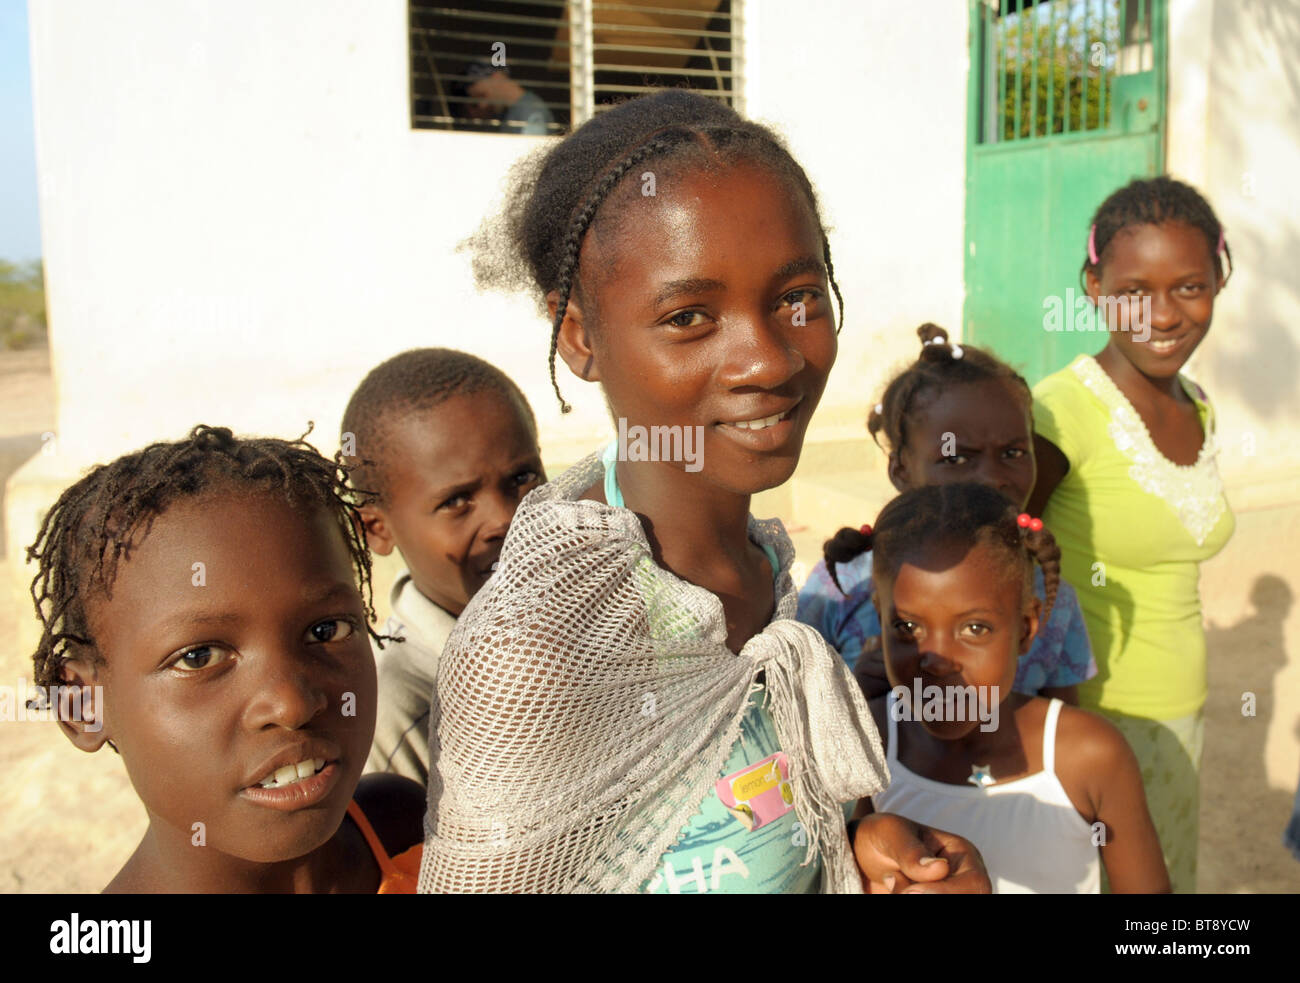 Group of happy Haitian youngsters Stock Photo